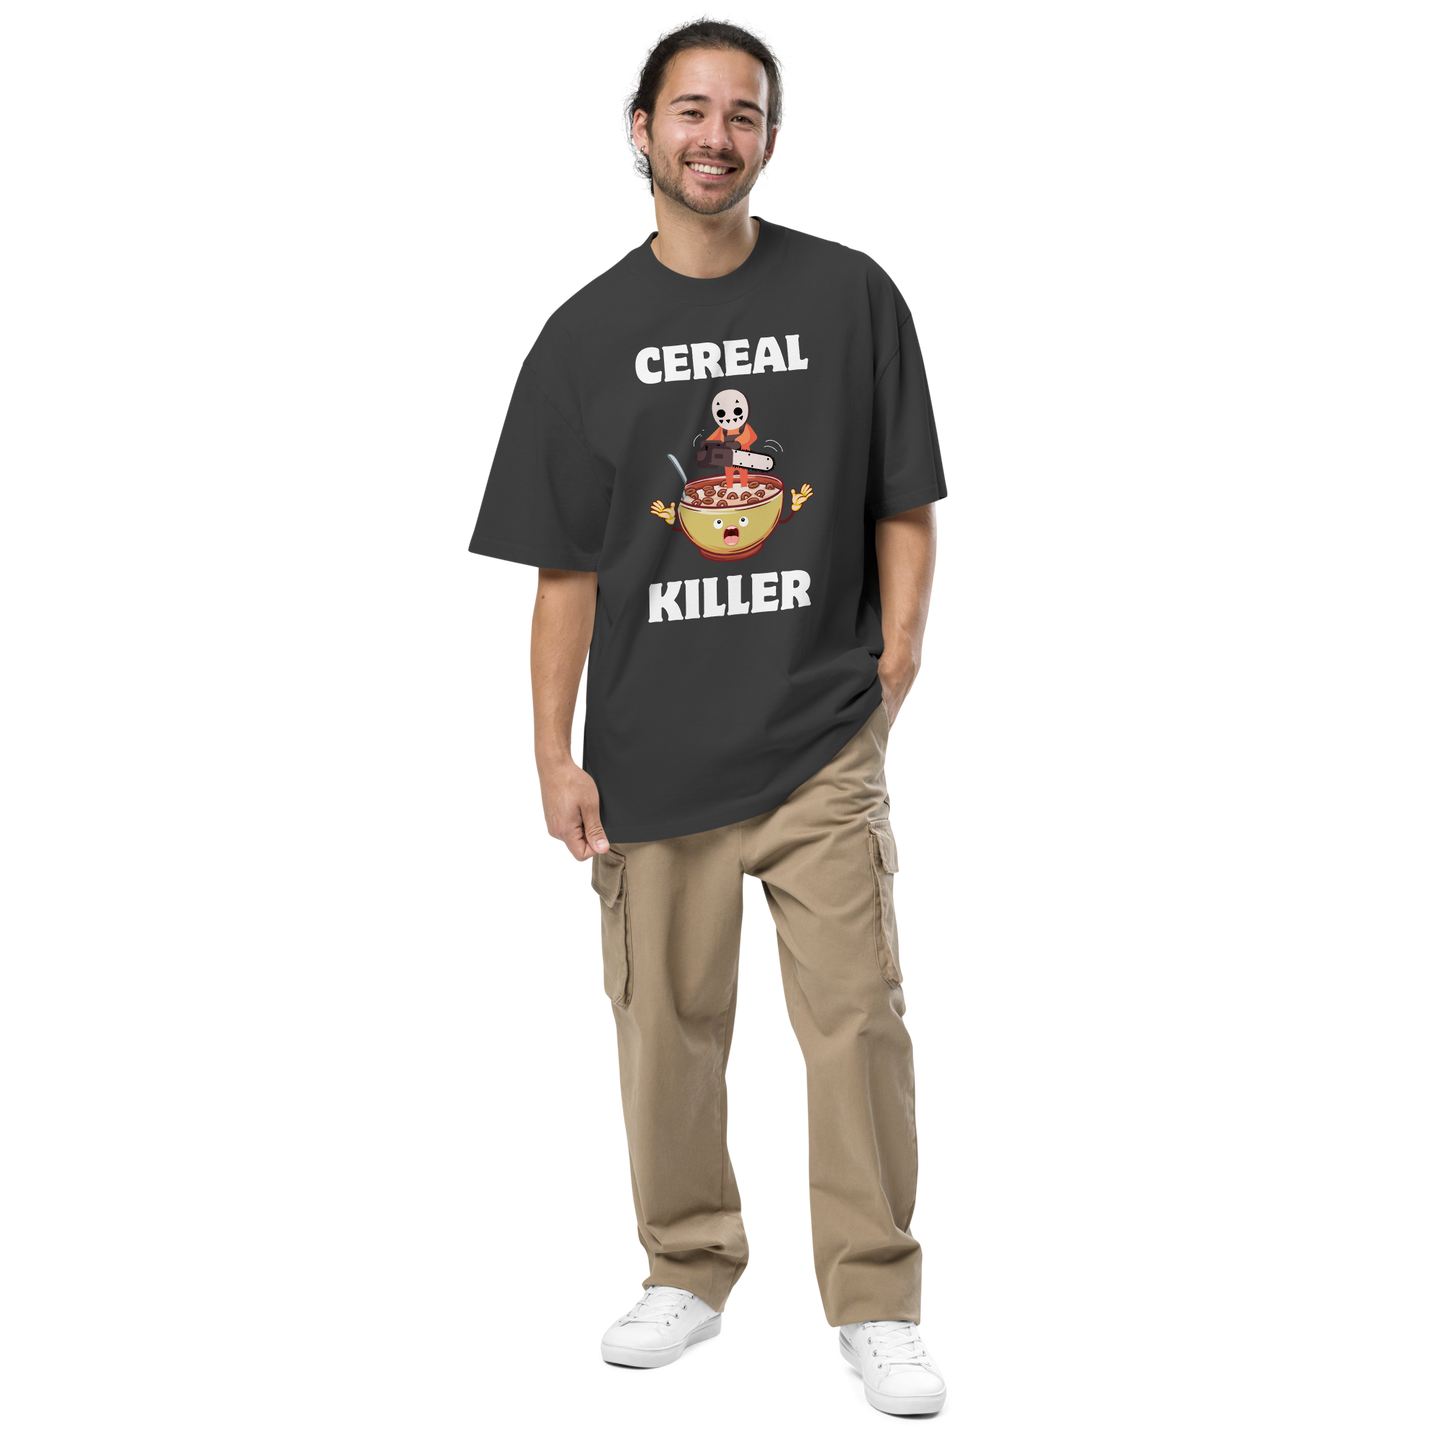 Man wearing a Faded Black Cereal Killer Oversized T-Shirt featuring a Cereal Killer graphic on the chest - Funny Graphic Oversized Tees - Boozy Fox